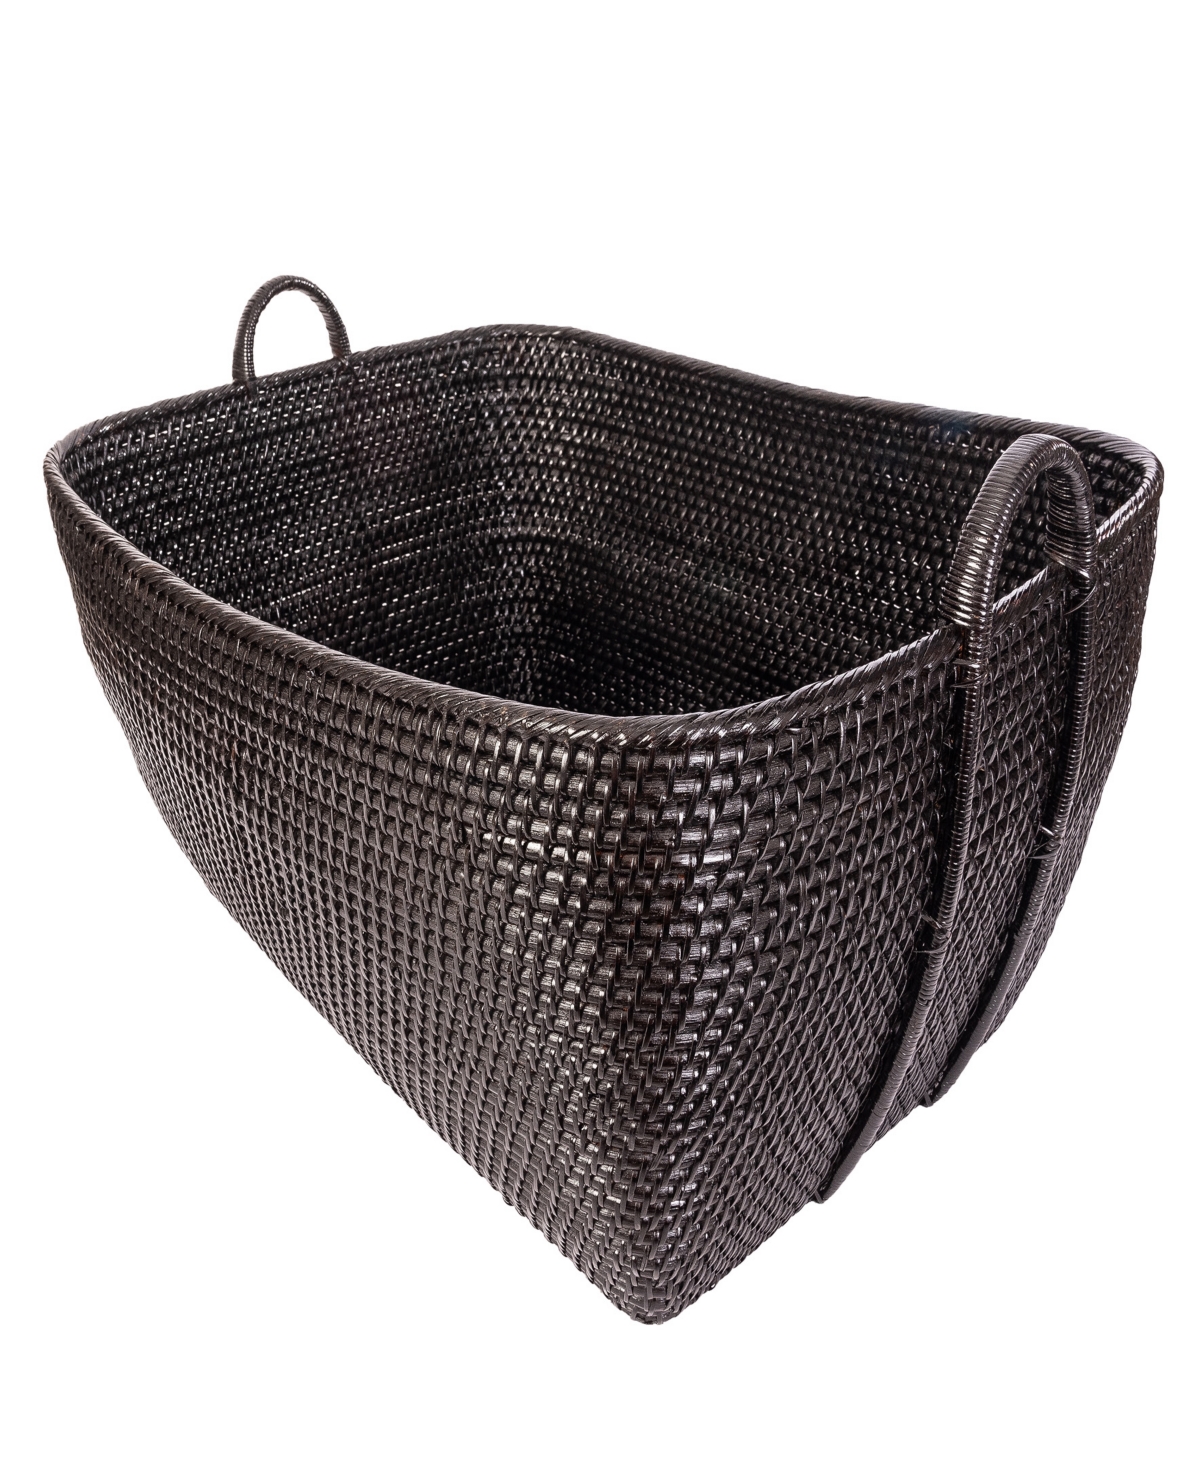 Artifacts Trading Company Saboga Home Everything Basket With Hoop Handles In Tudor Black